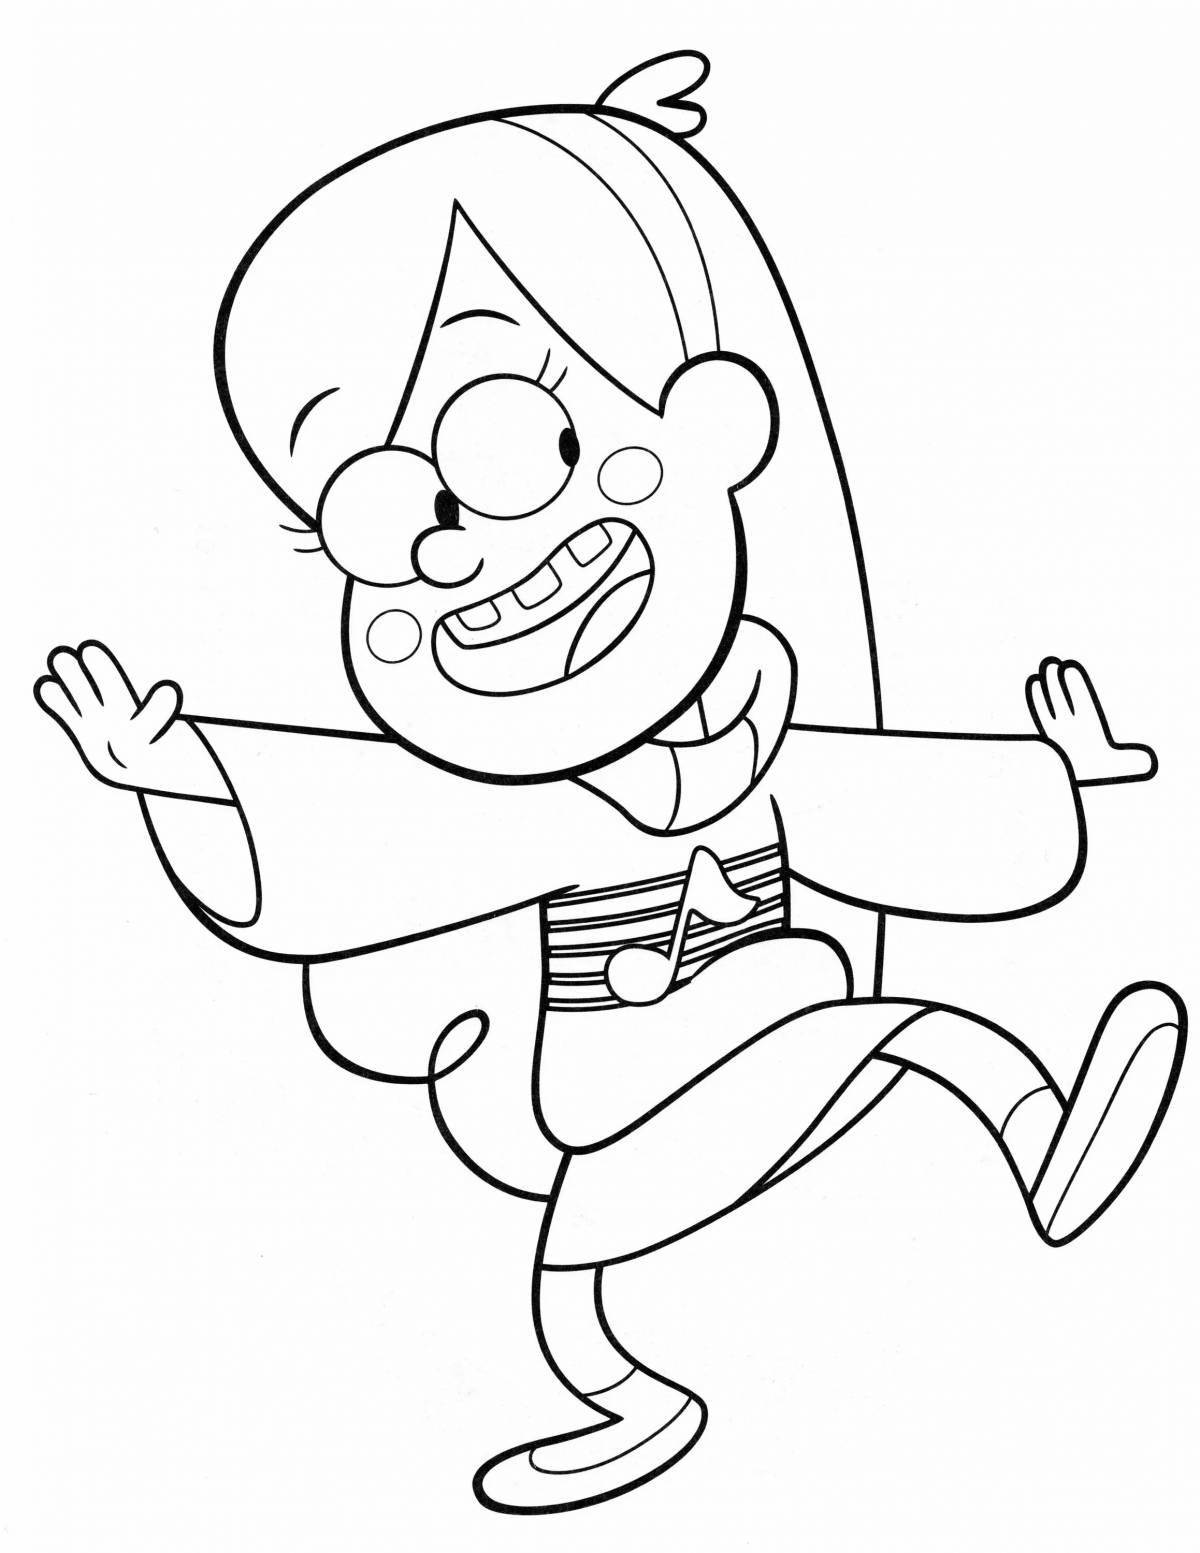 Coloring page gravity falls everything